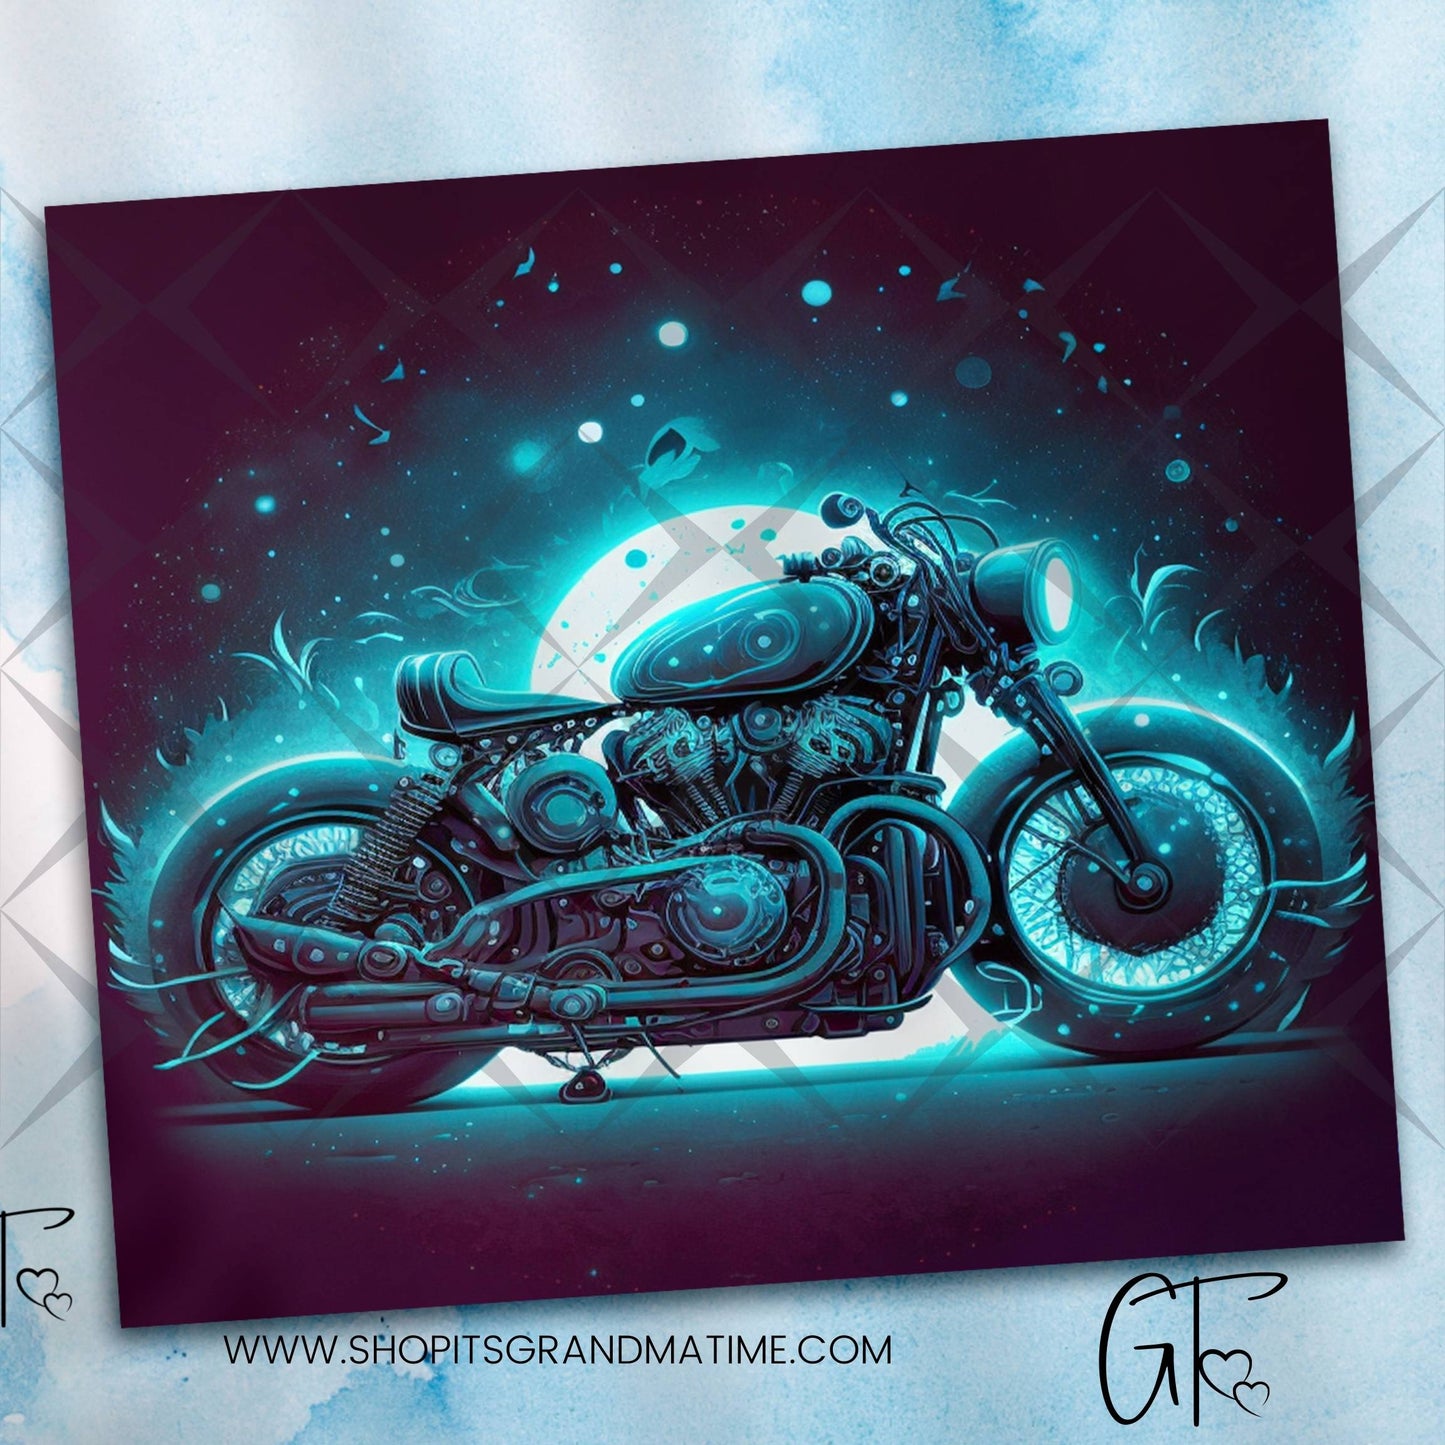 SUB1652 Motorcycle in the Night Tumbler Sublimation Transfer